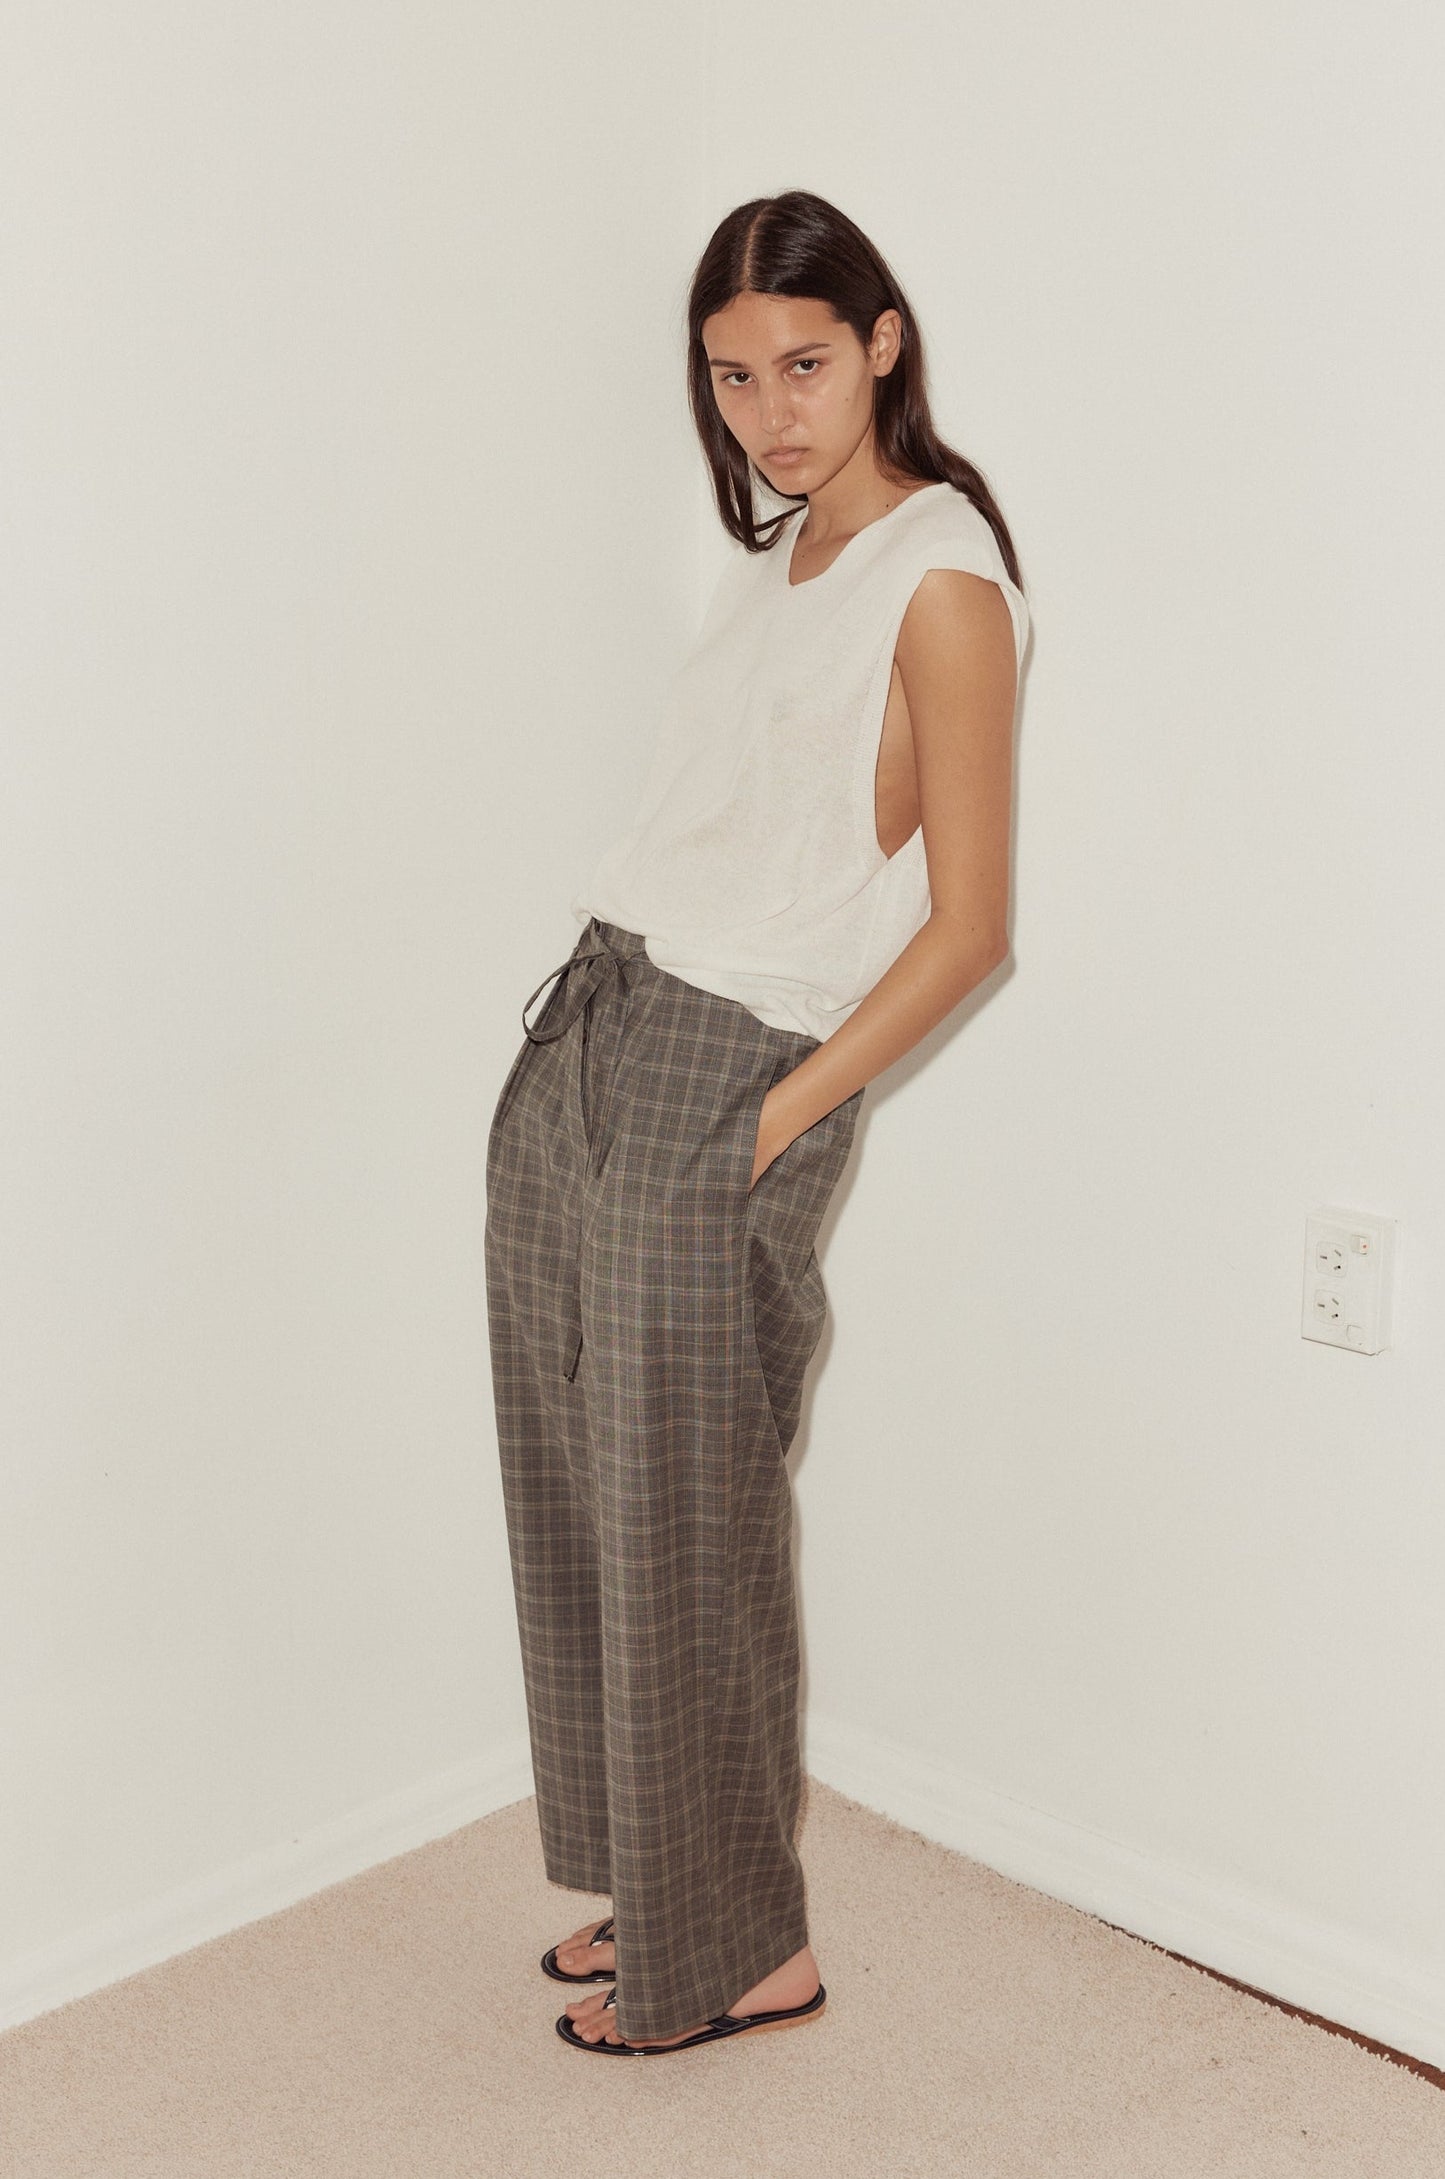 Female model wearing Tailored Pants - Everyday Check by Deiji Studios against plain background